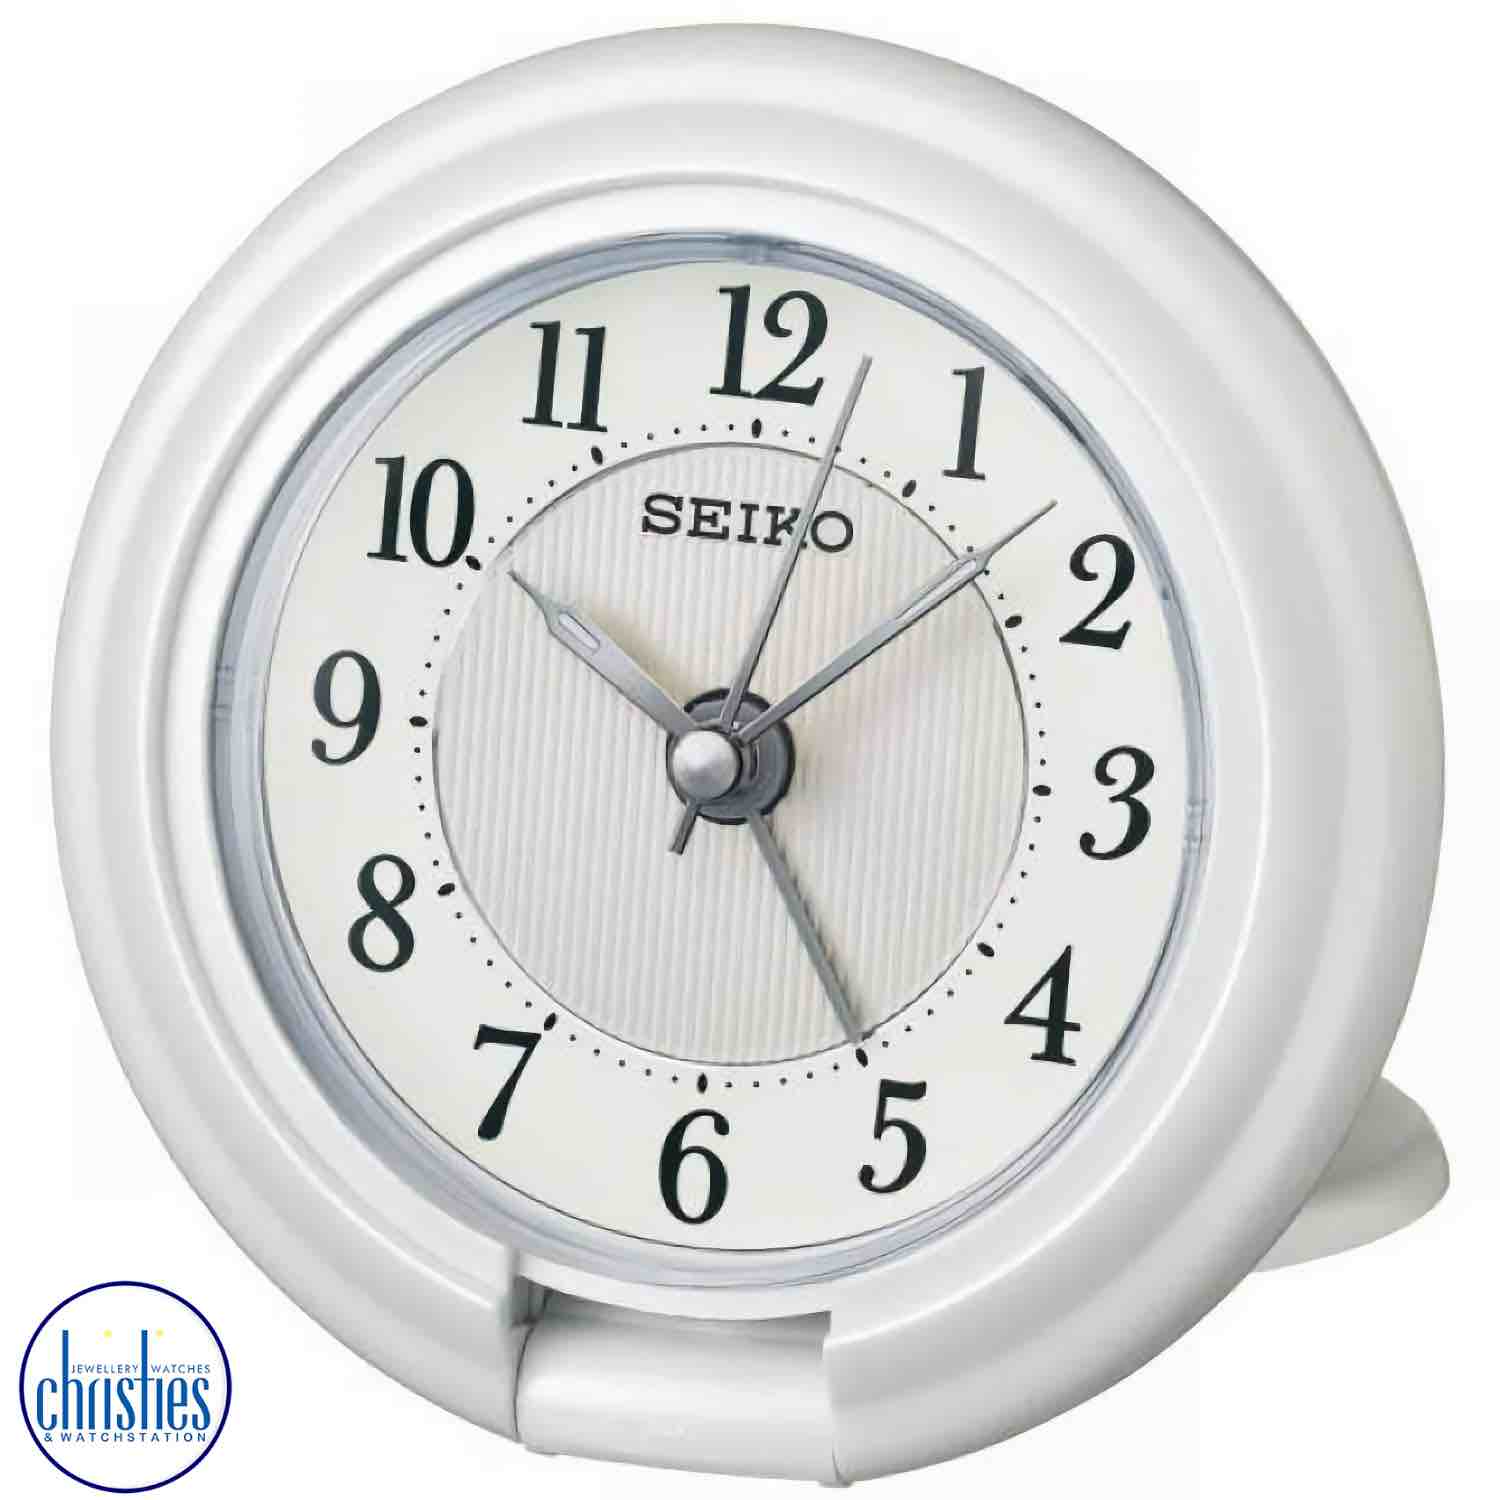 QHT014W Seiko Clocks Travel Alarm Clock. The QHE114-K Seiko Alarm Clock with Timer & Stopwatch is the perfect addition to any bedside table.